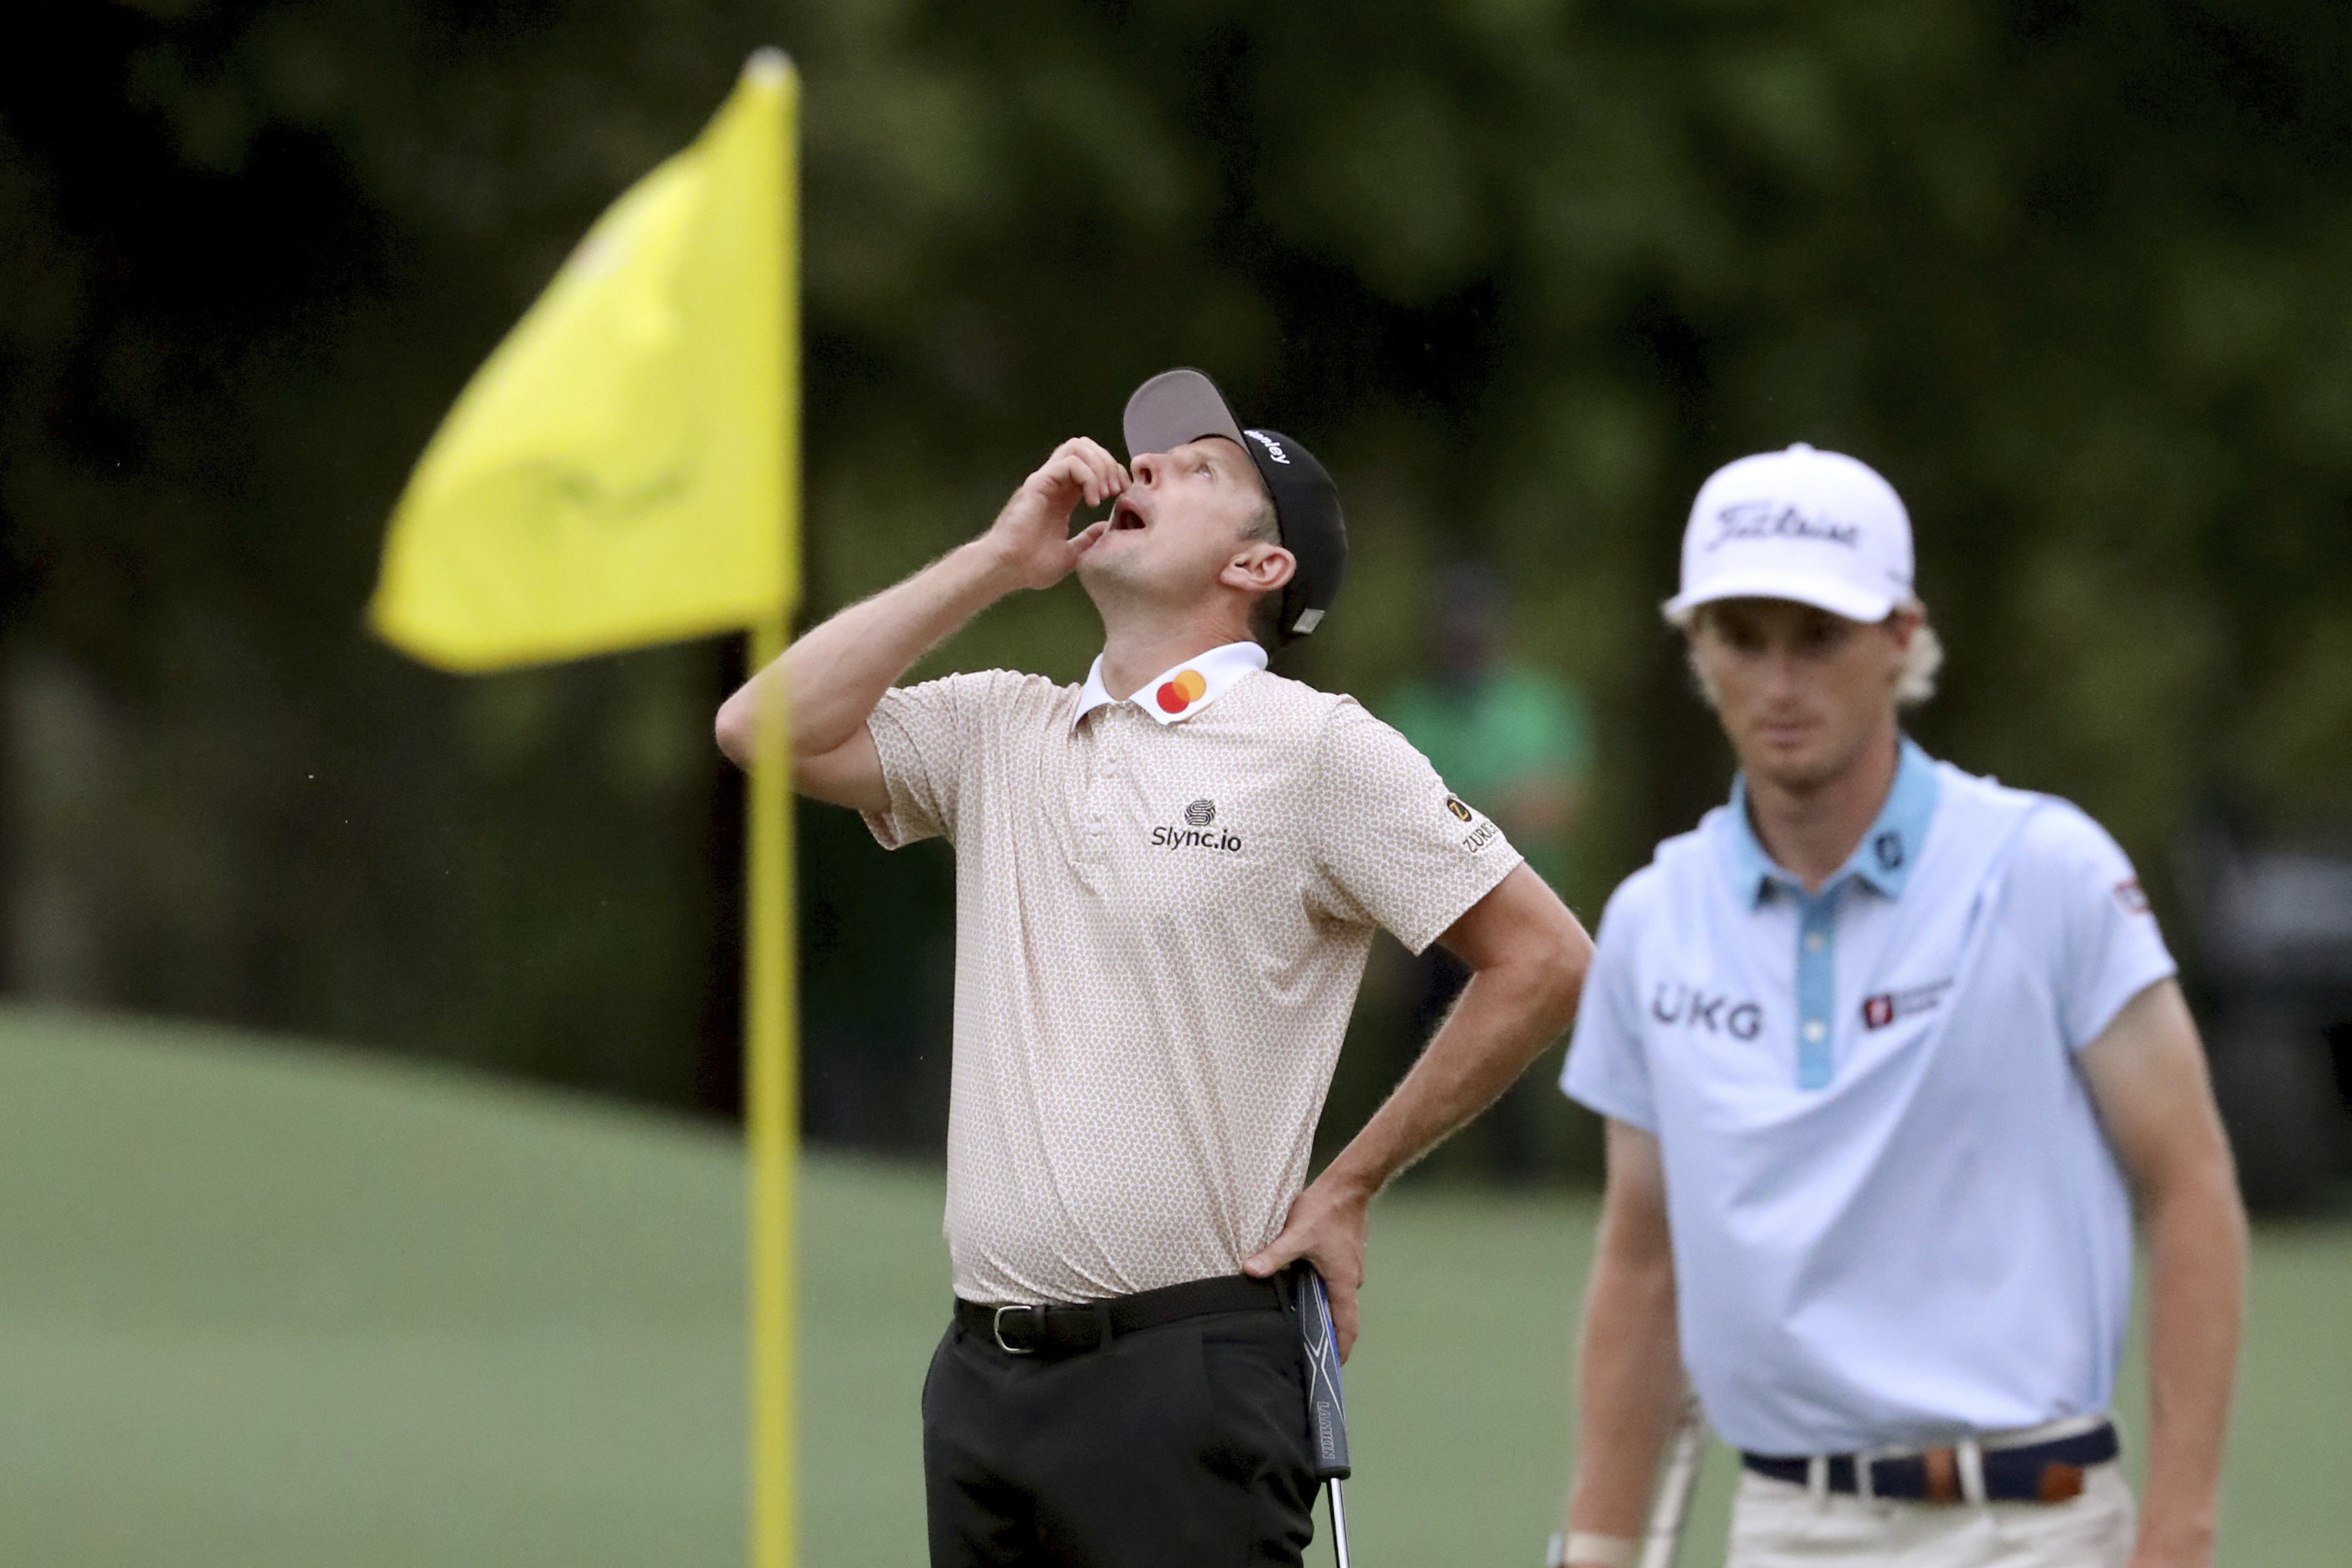 Justin Rose struggled a little in round three and starts the final round four shots off the leader. Photo: AP